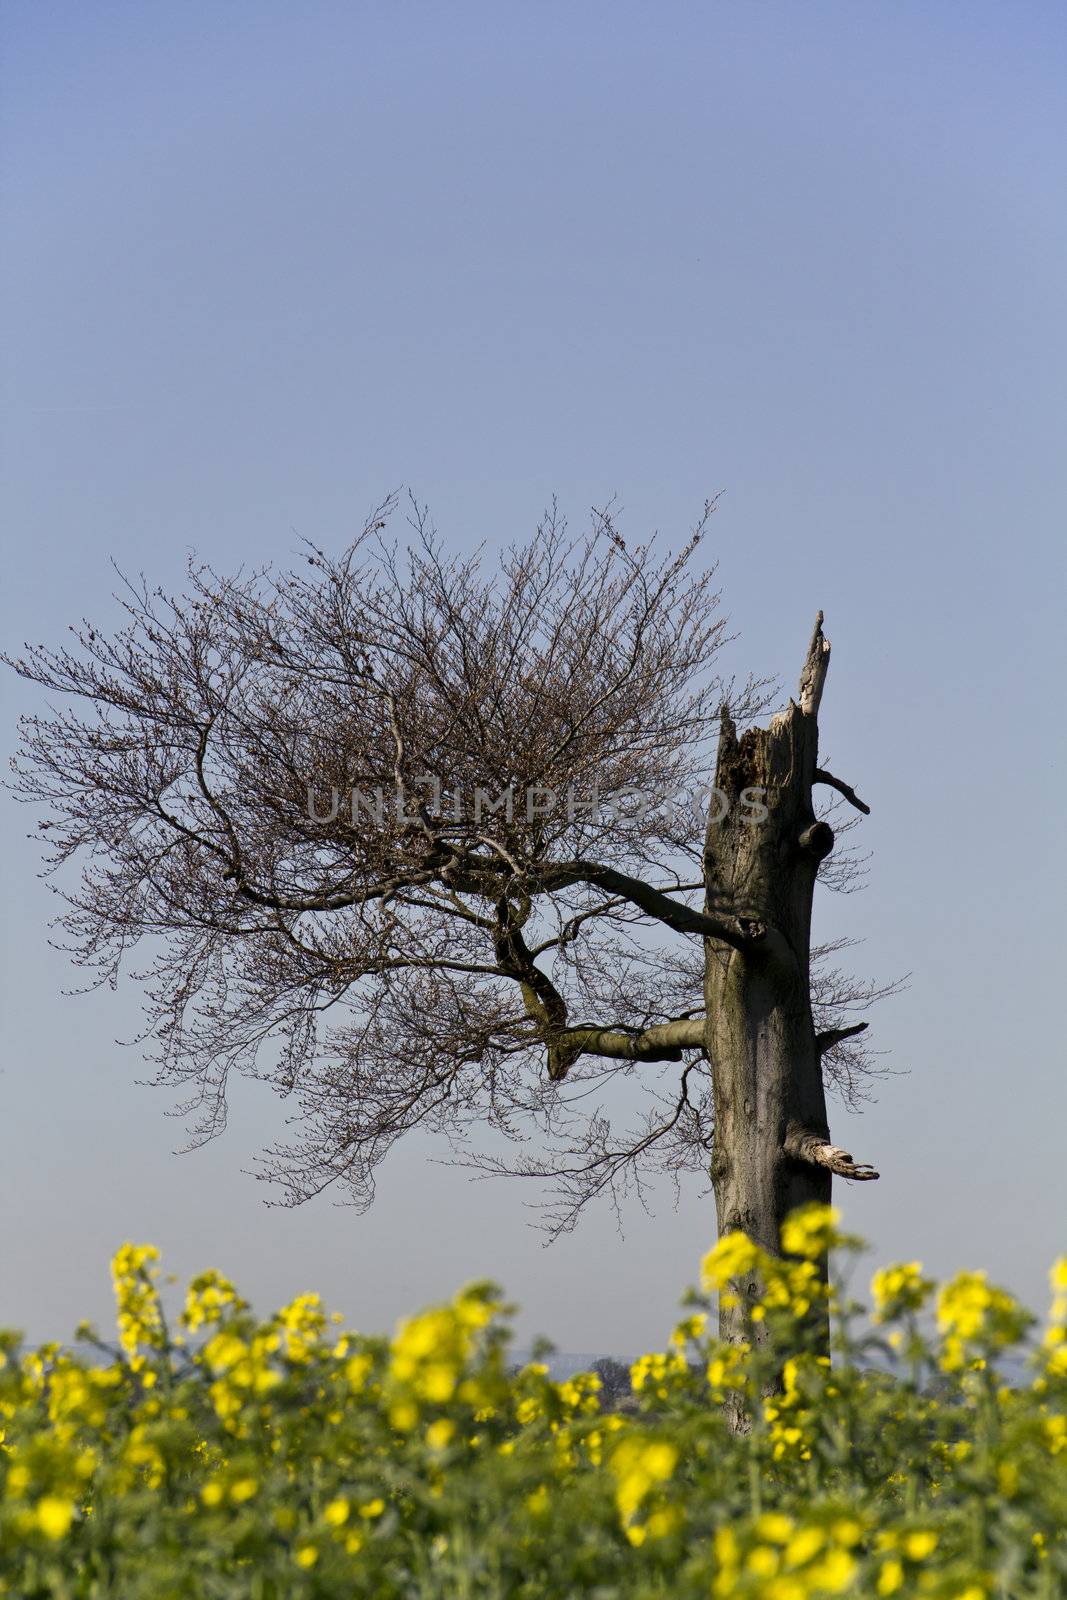 Strange Tree With Rapeseed by Downart